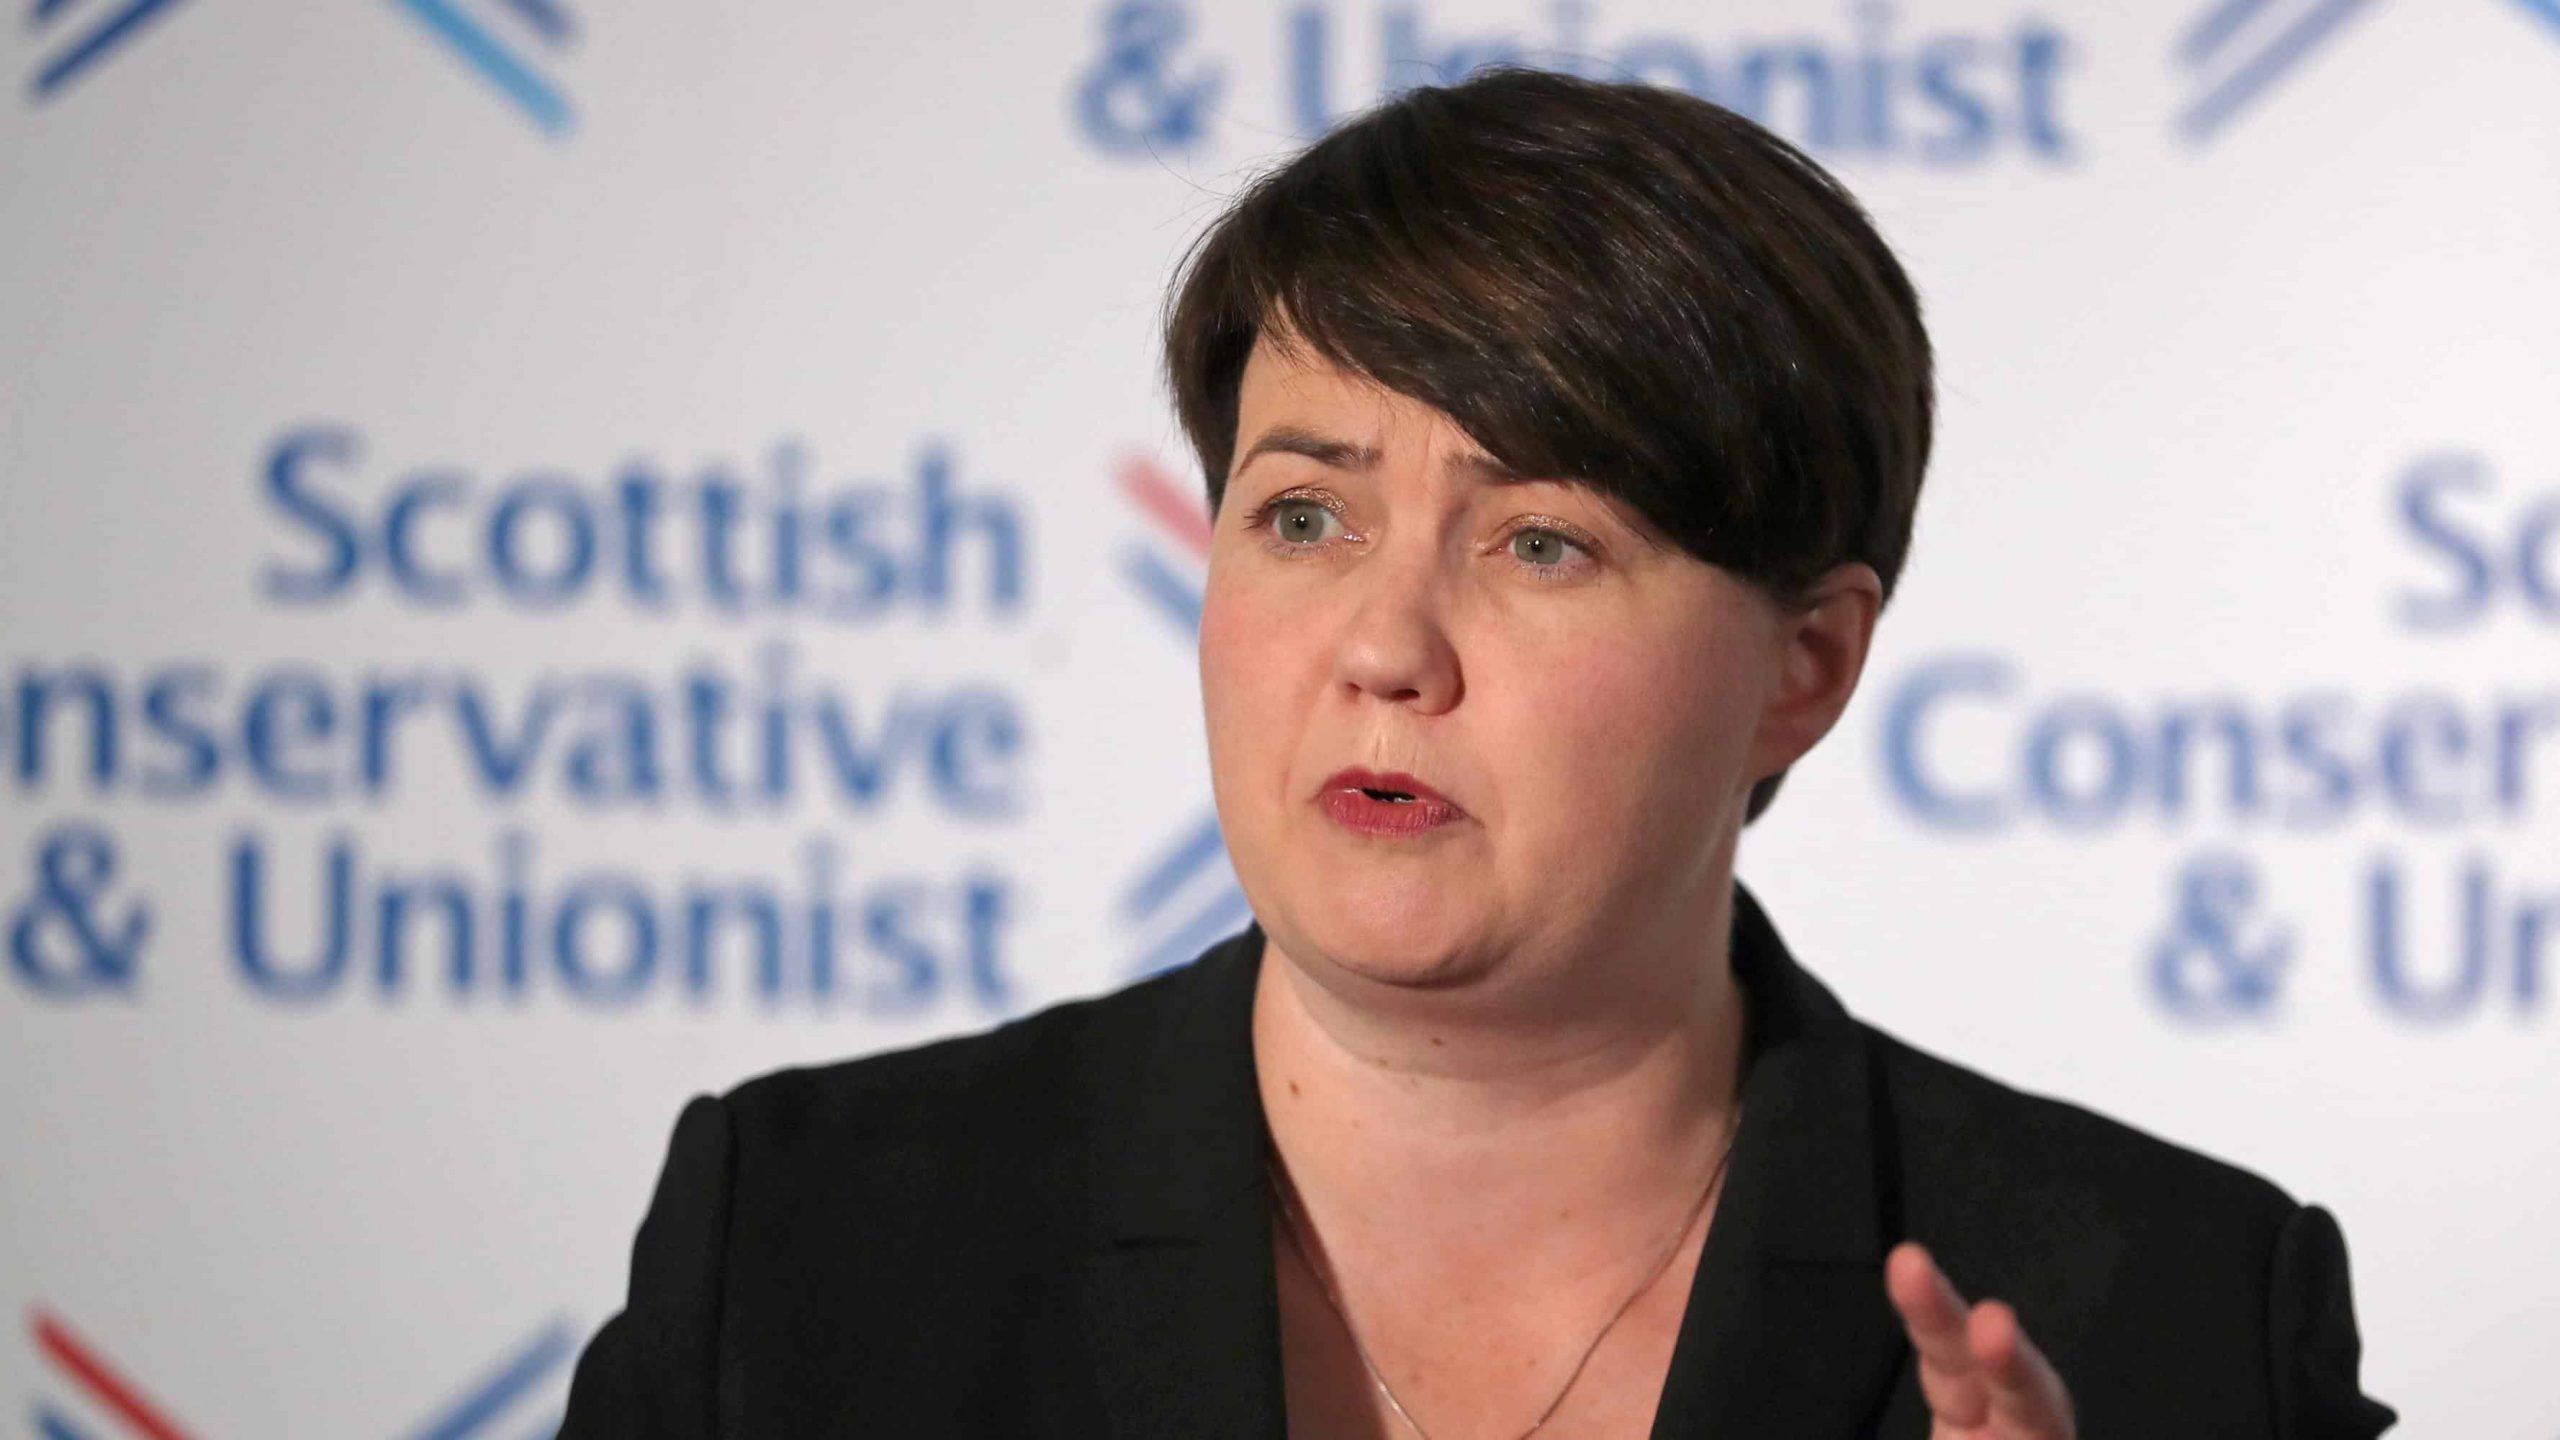 I’ll skinny dip in Loch Ness if the SNP win 50 seats – Ruth Davidson